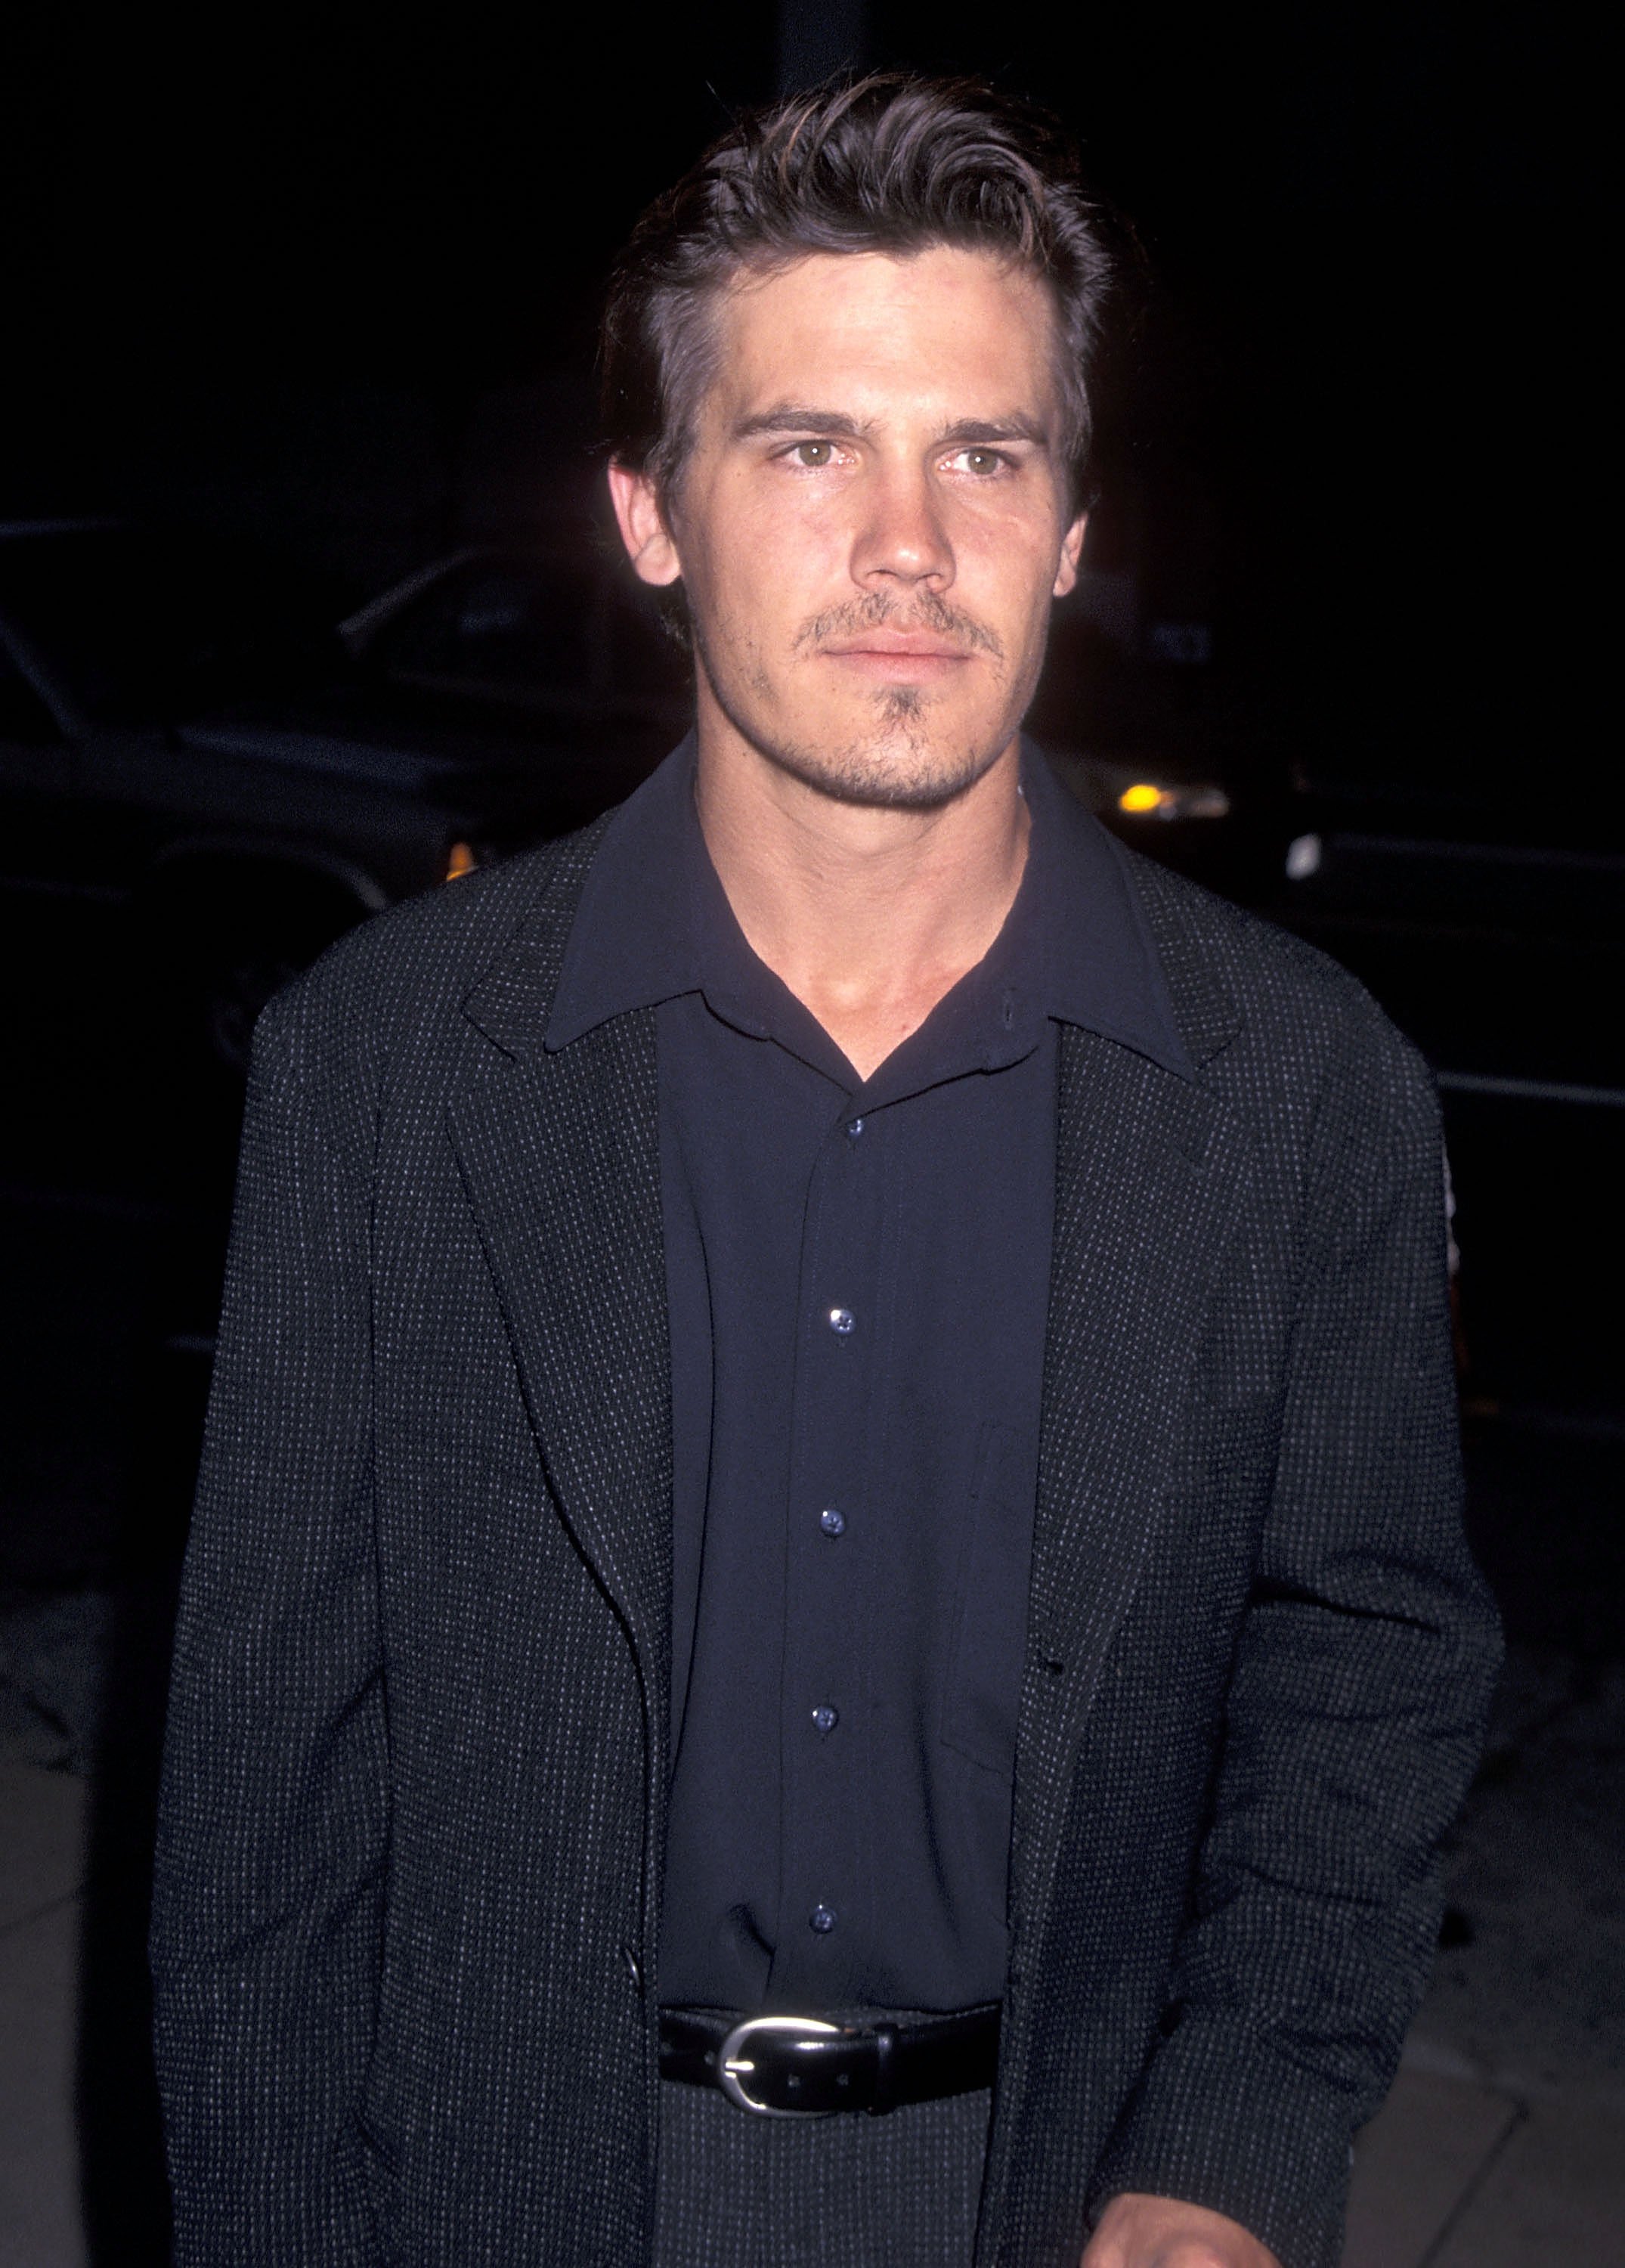 Josh Brolin at the "I Shot Andy Warhol" Hollywood, California premiere on May 16, 1996. | Source: Getty Images